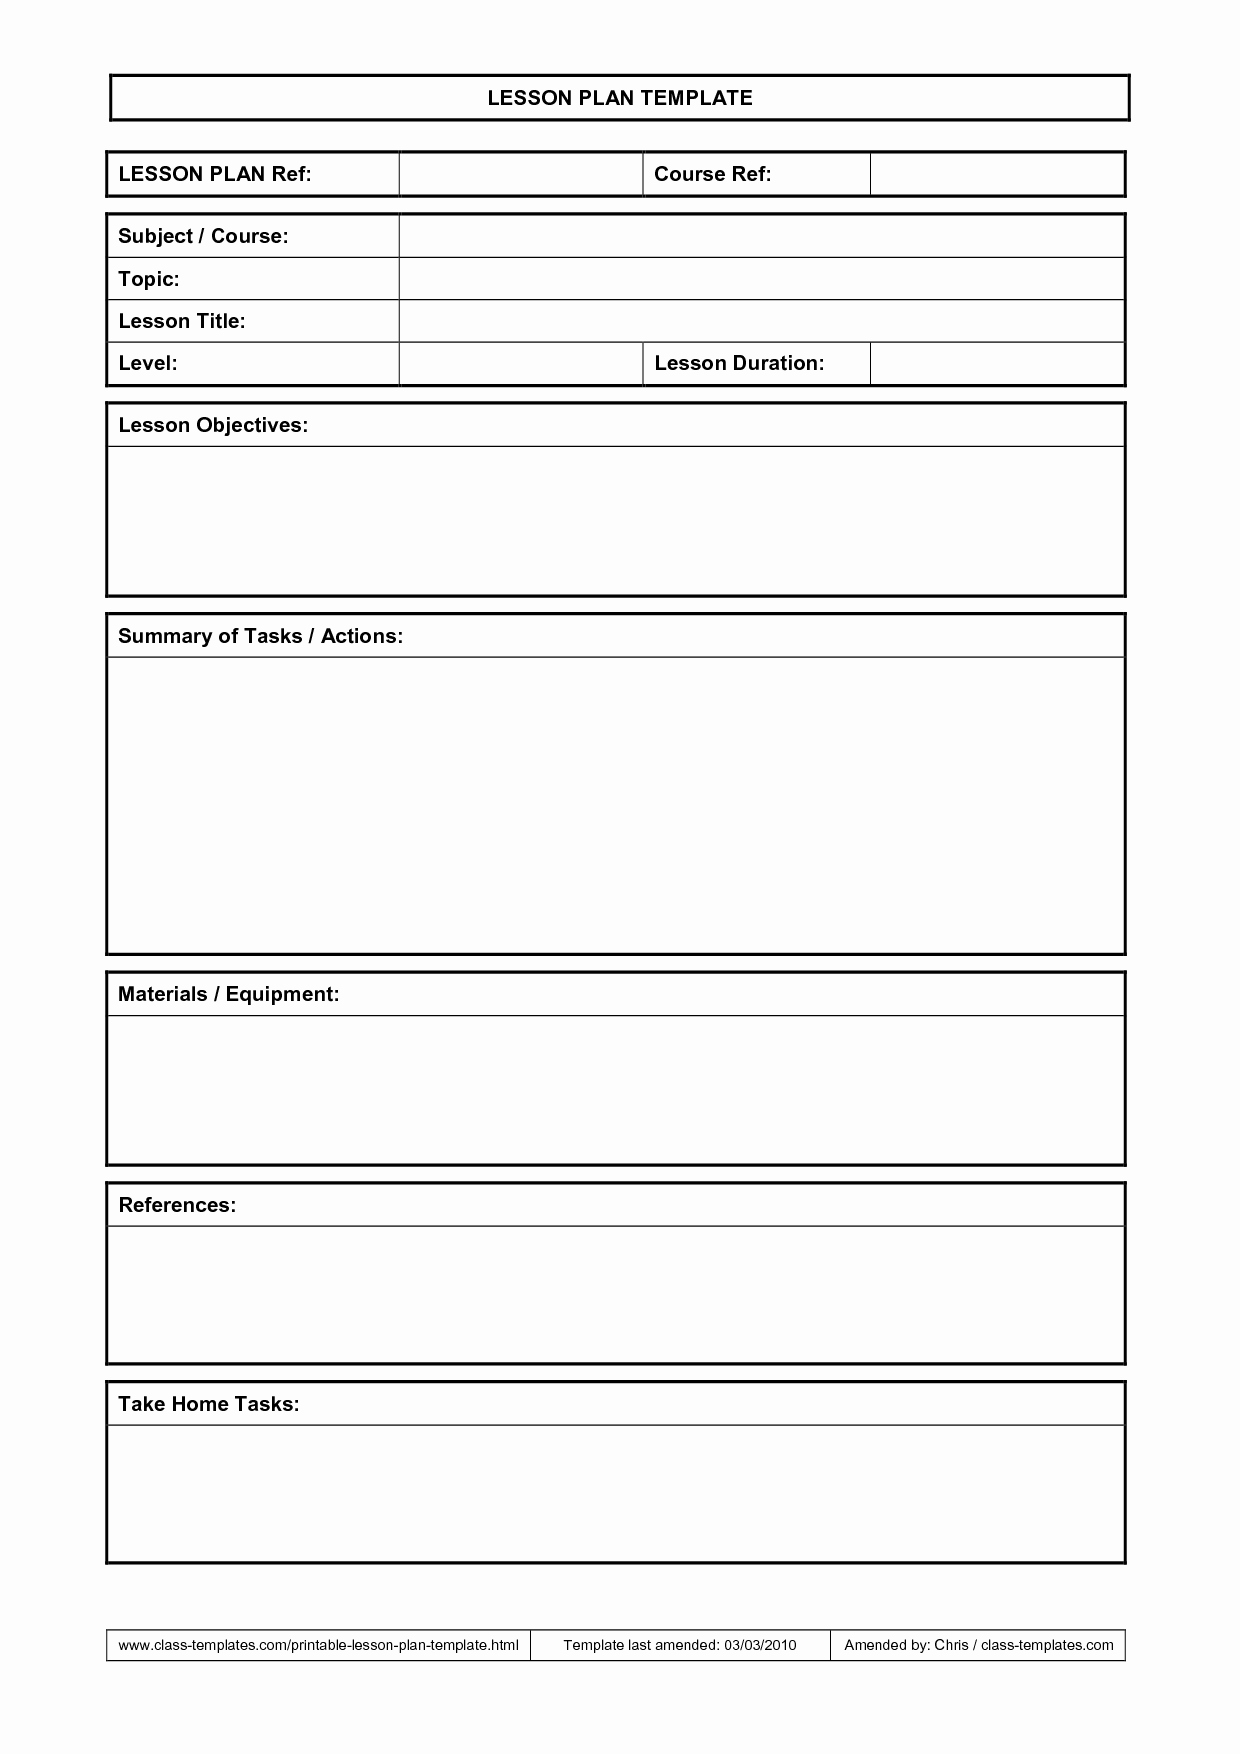 Blank Ubd Lesson Plan Template Best Of Lesson Plan Template … Teaching Ideas